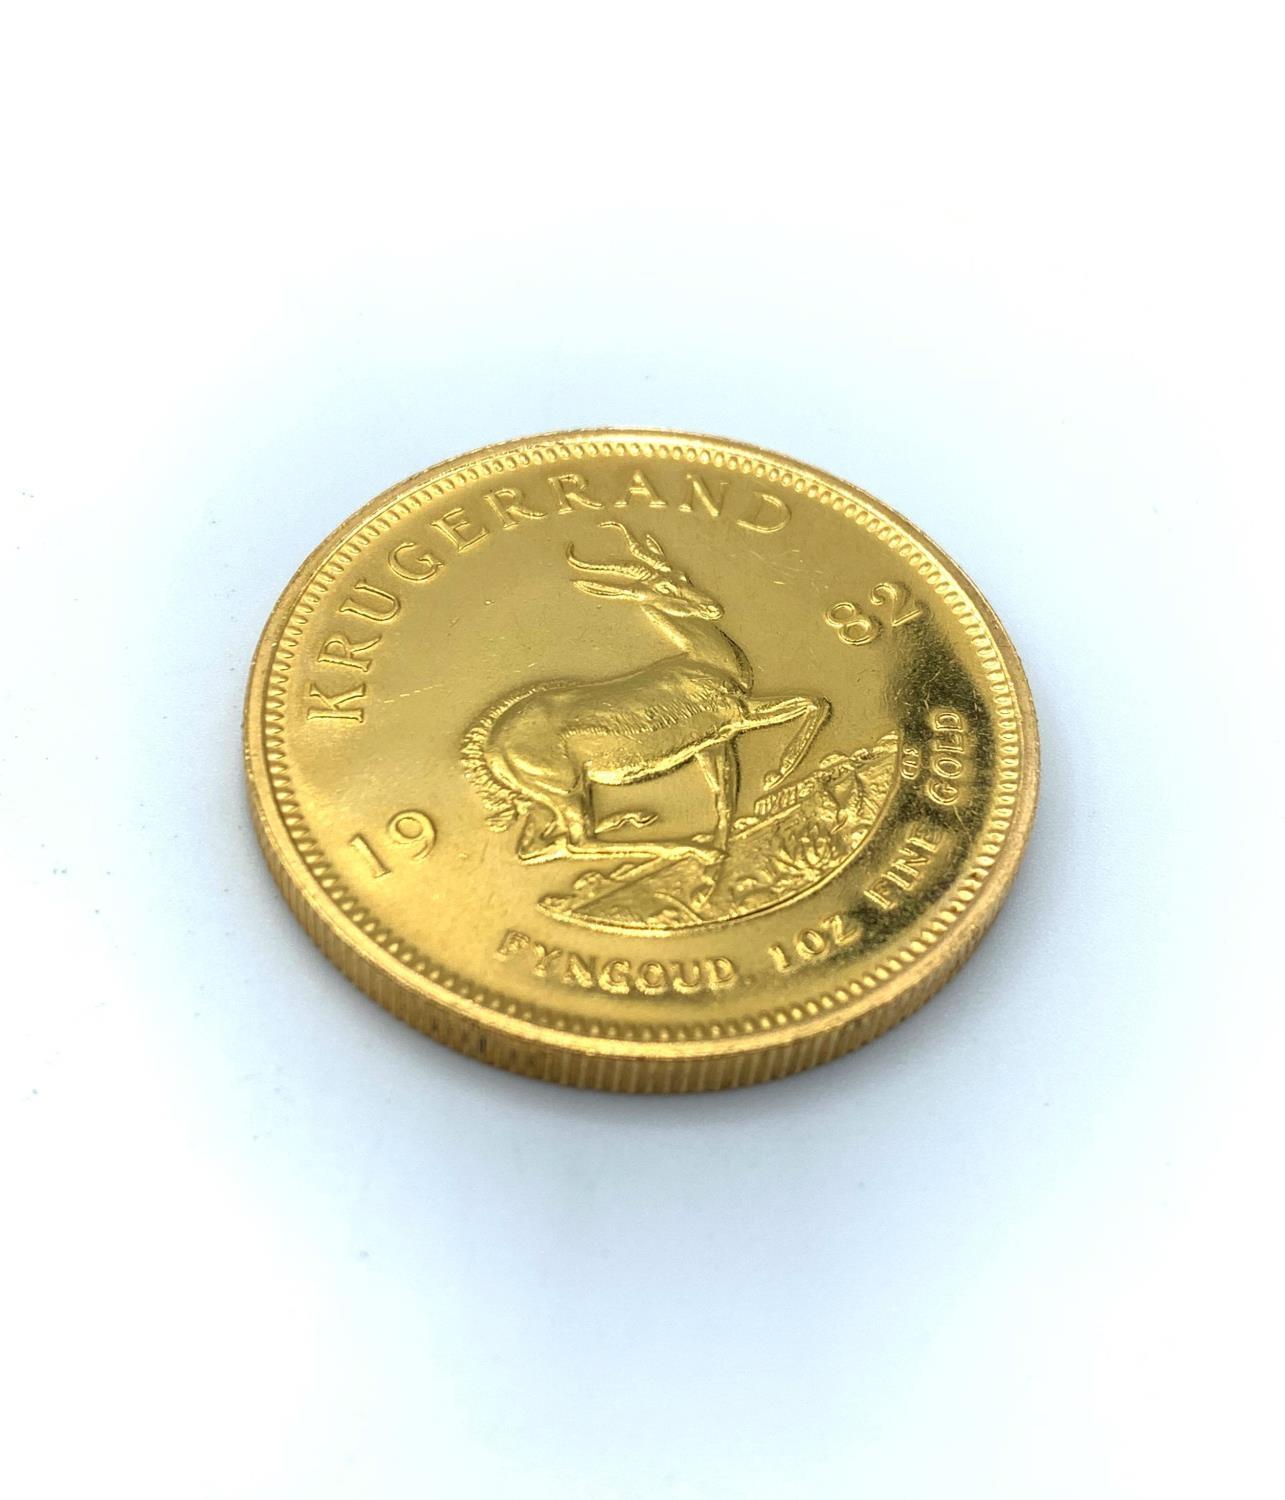 Krugerrand Coin Minted in 1982 CI03 Fine Gold - Image 2 of 3